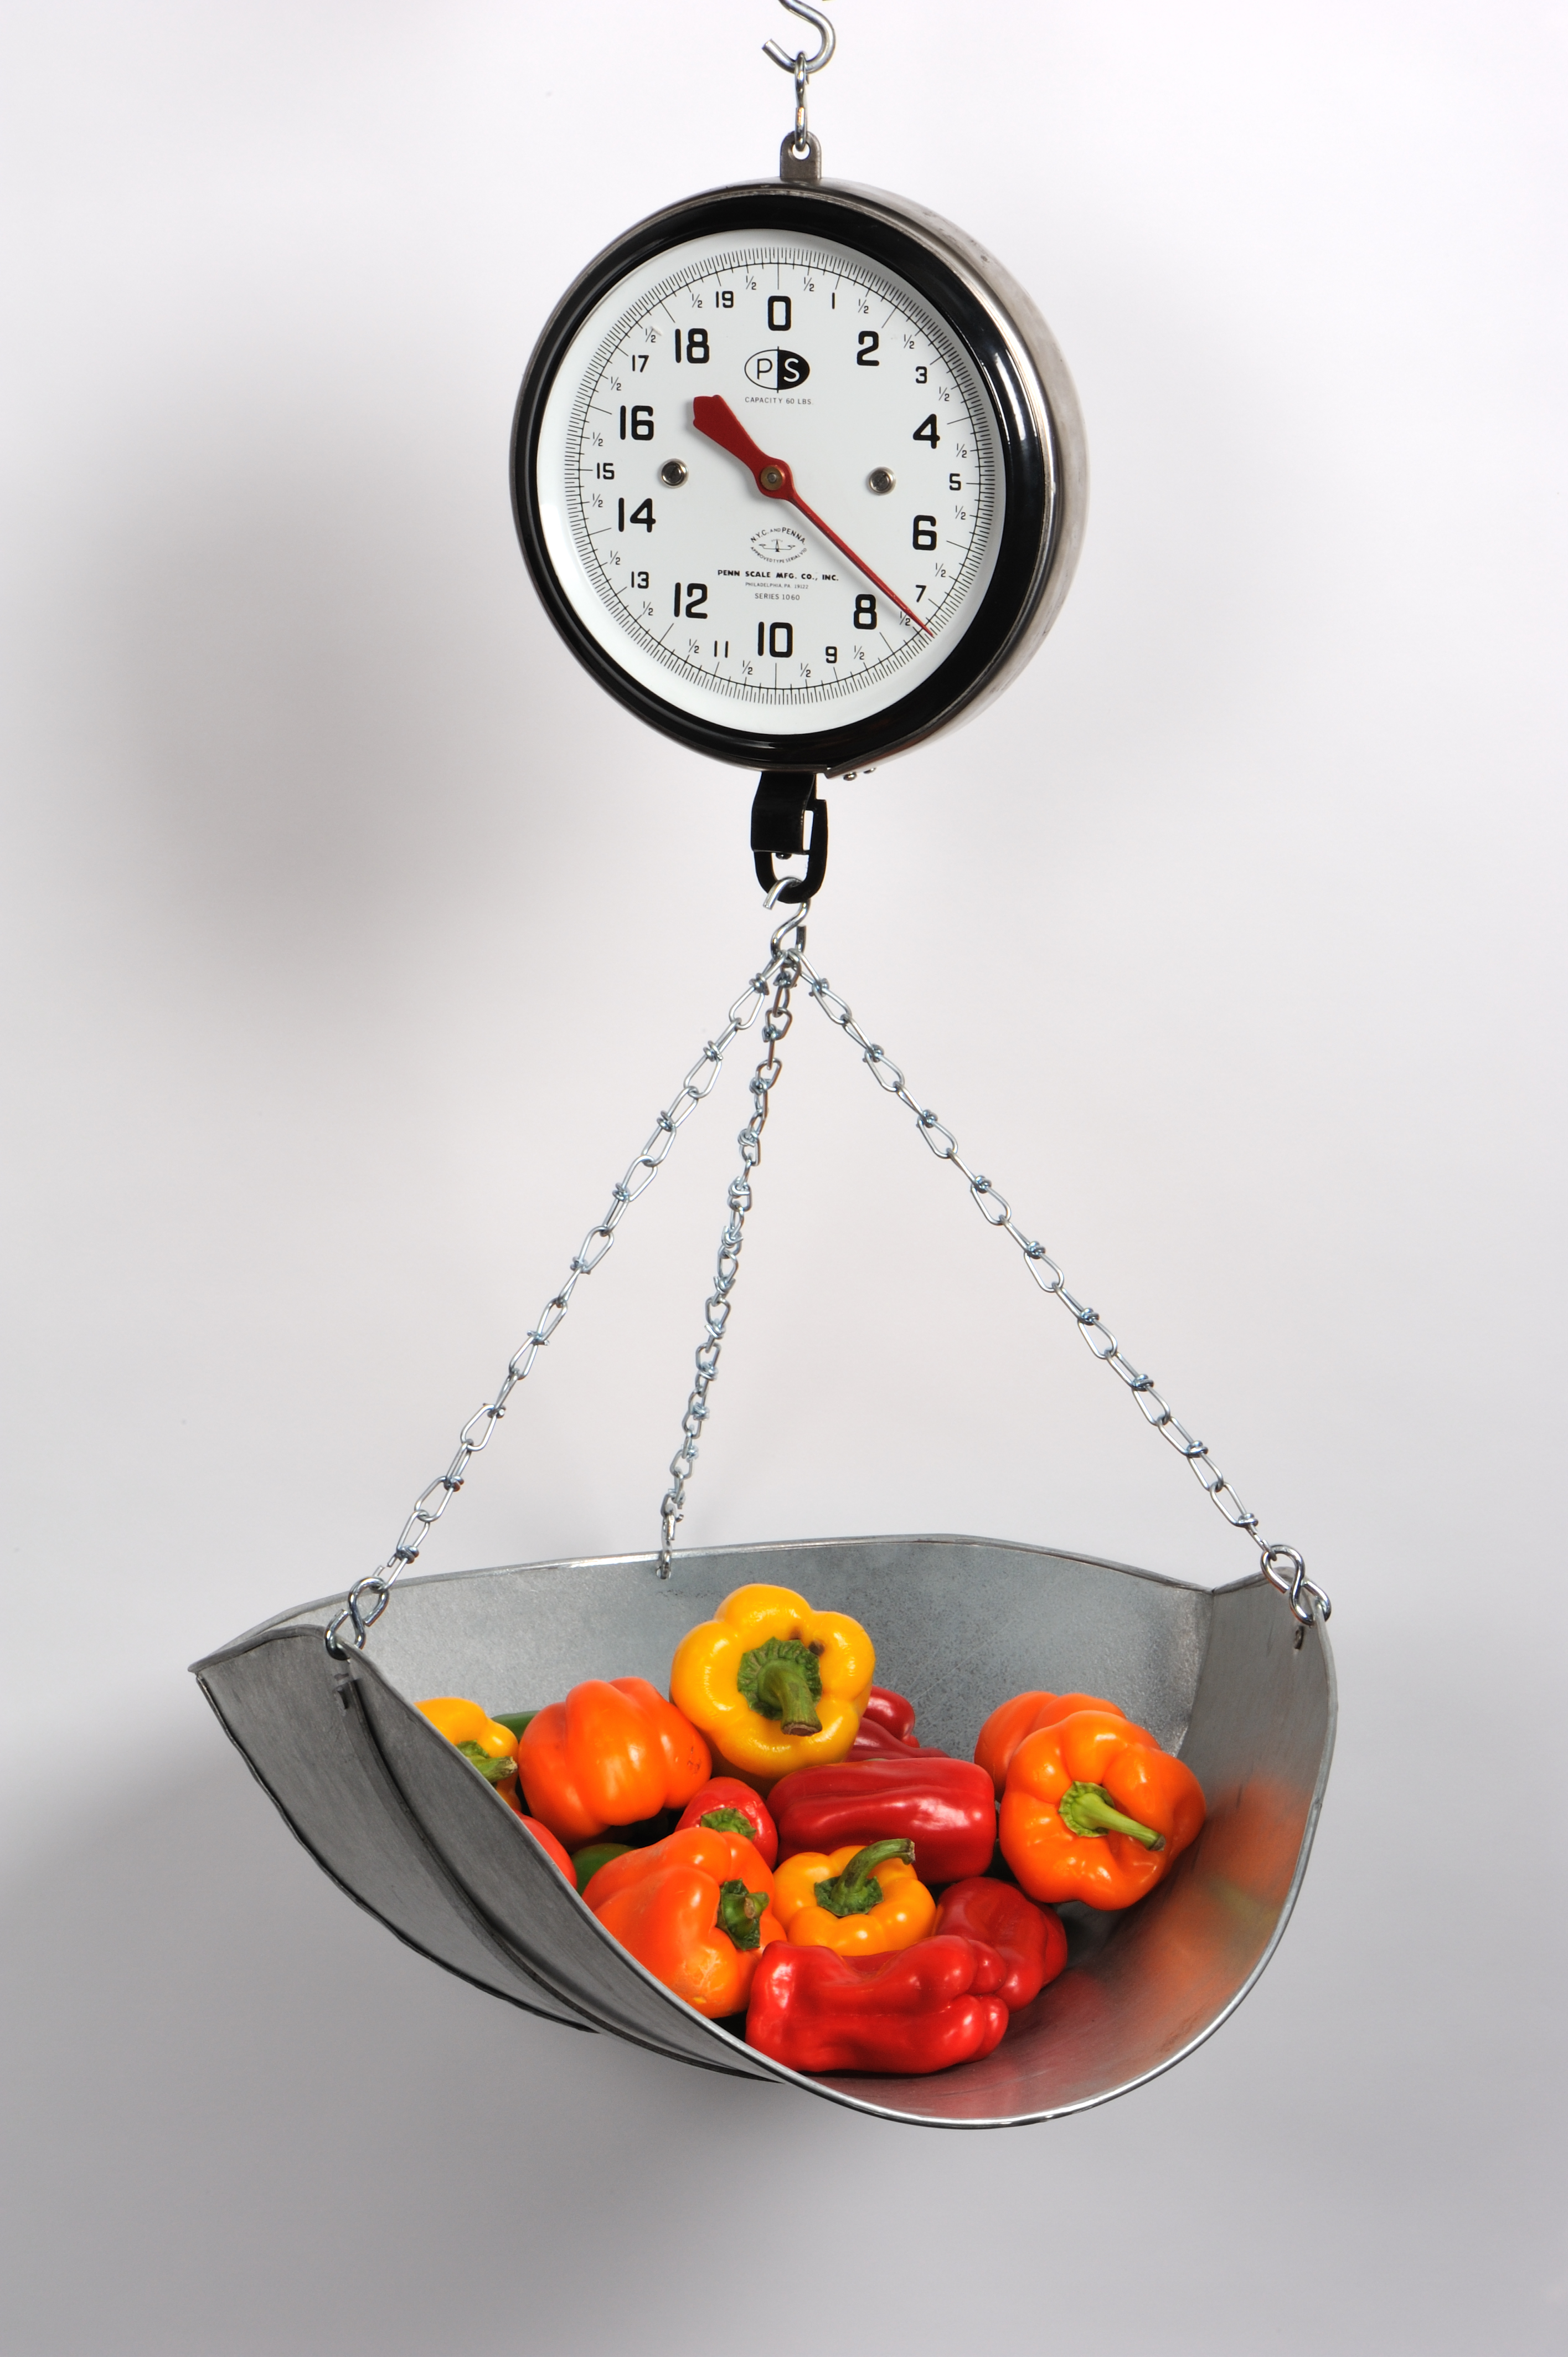 1060 VG 60 lb hanging scale with galvanized steel vegetable scoop by Penn Scale, made in USA